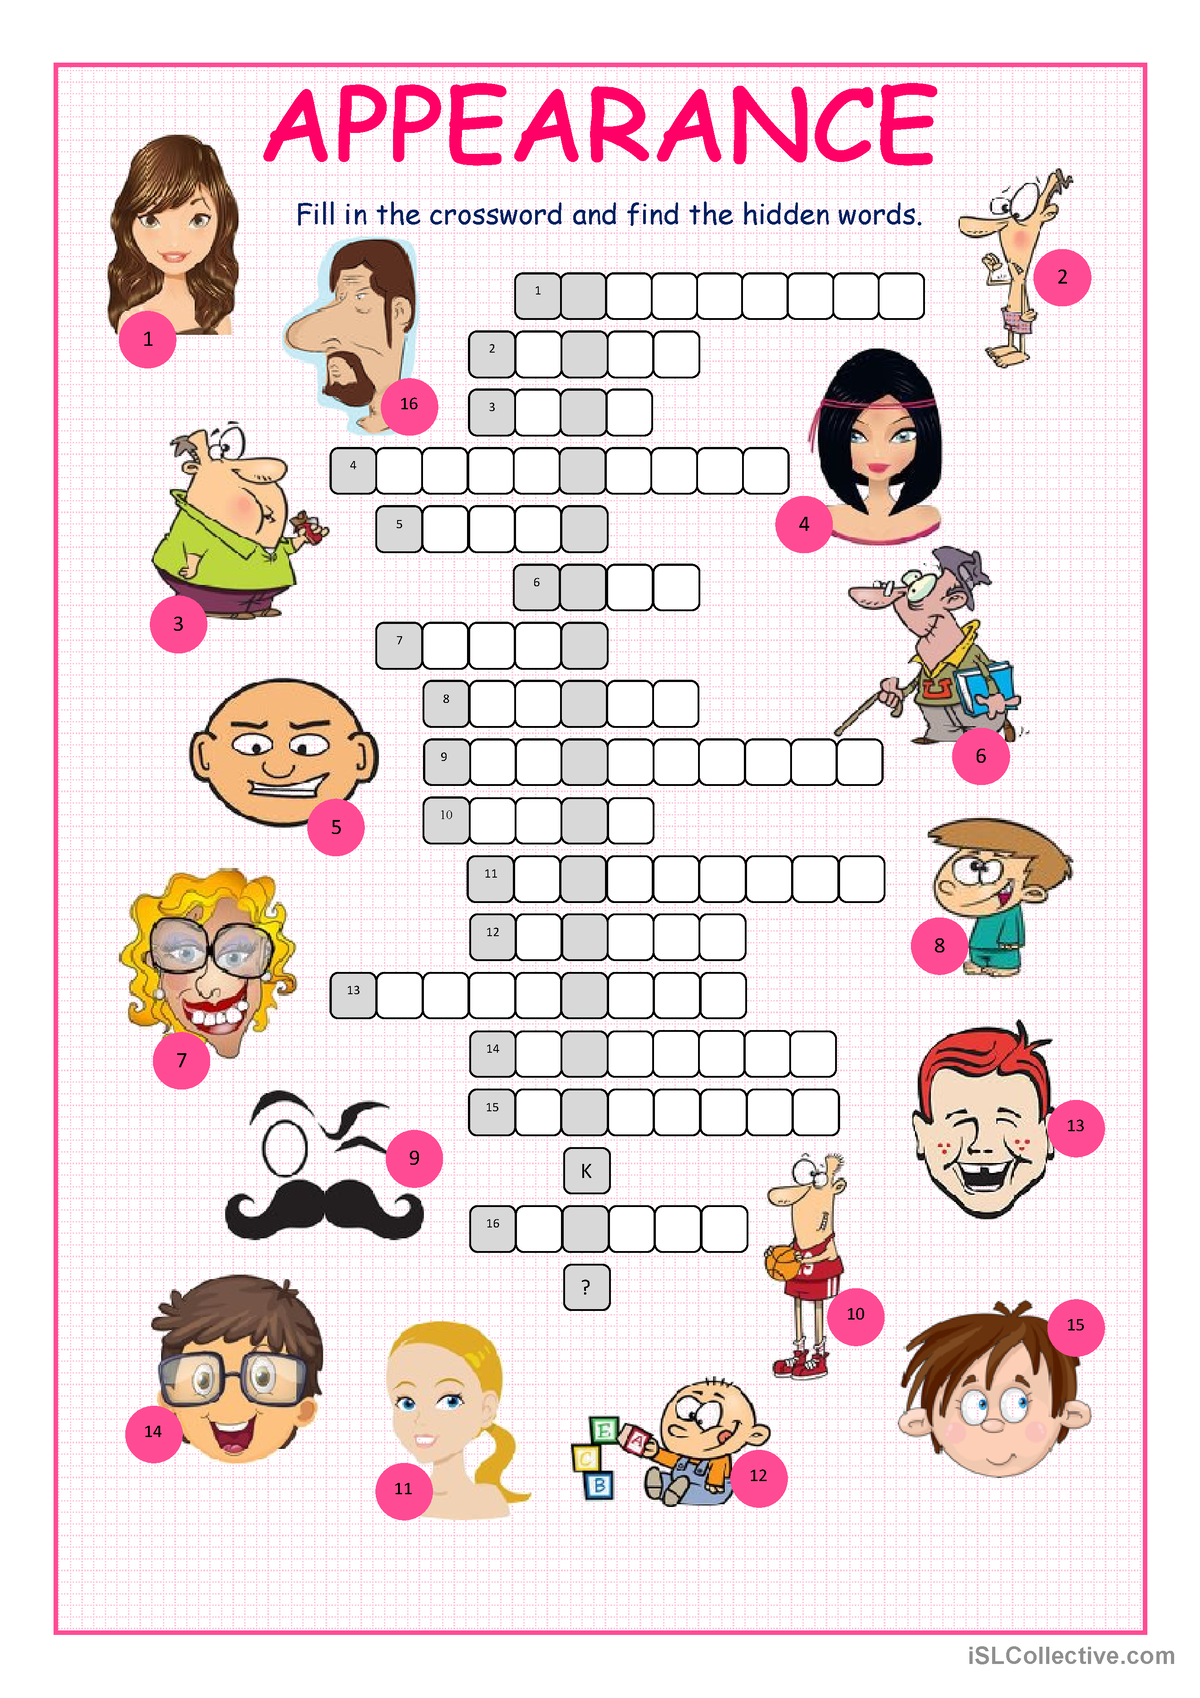 Appearance Crossword Puzzle Fill in the crossword and find the hidden